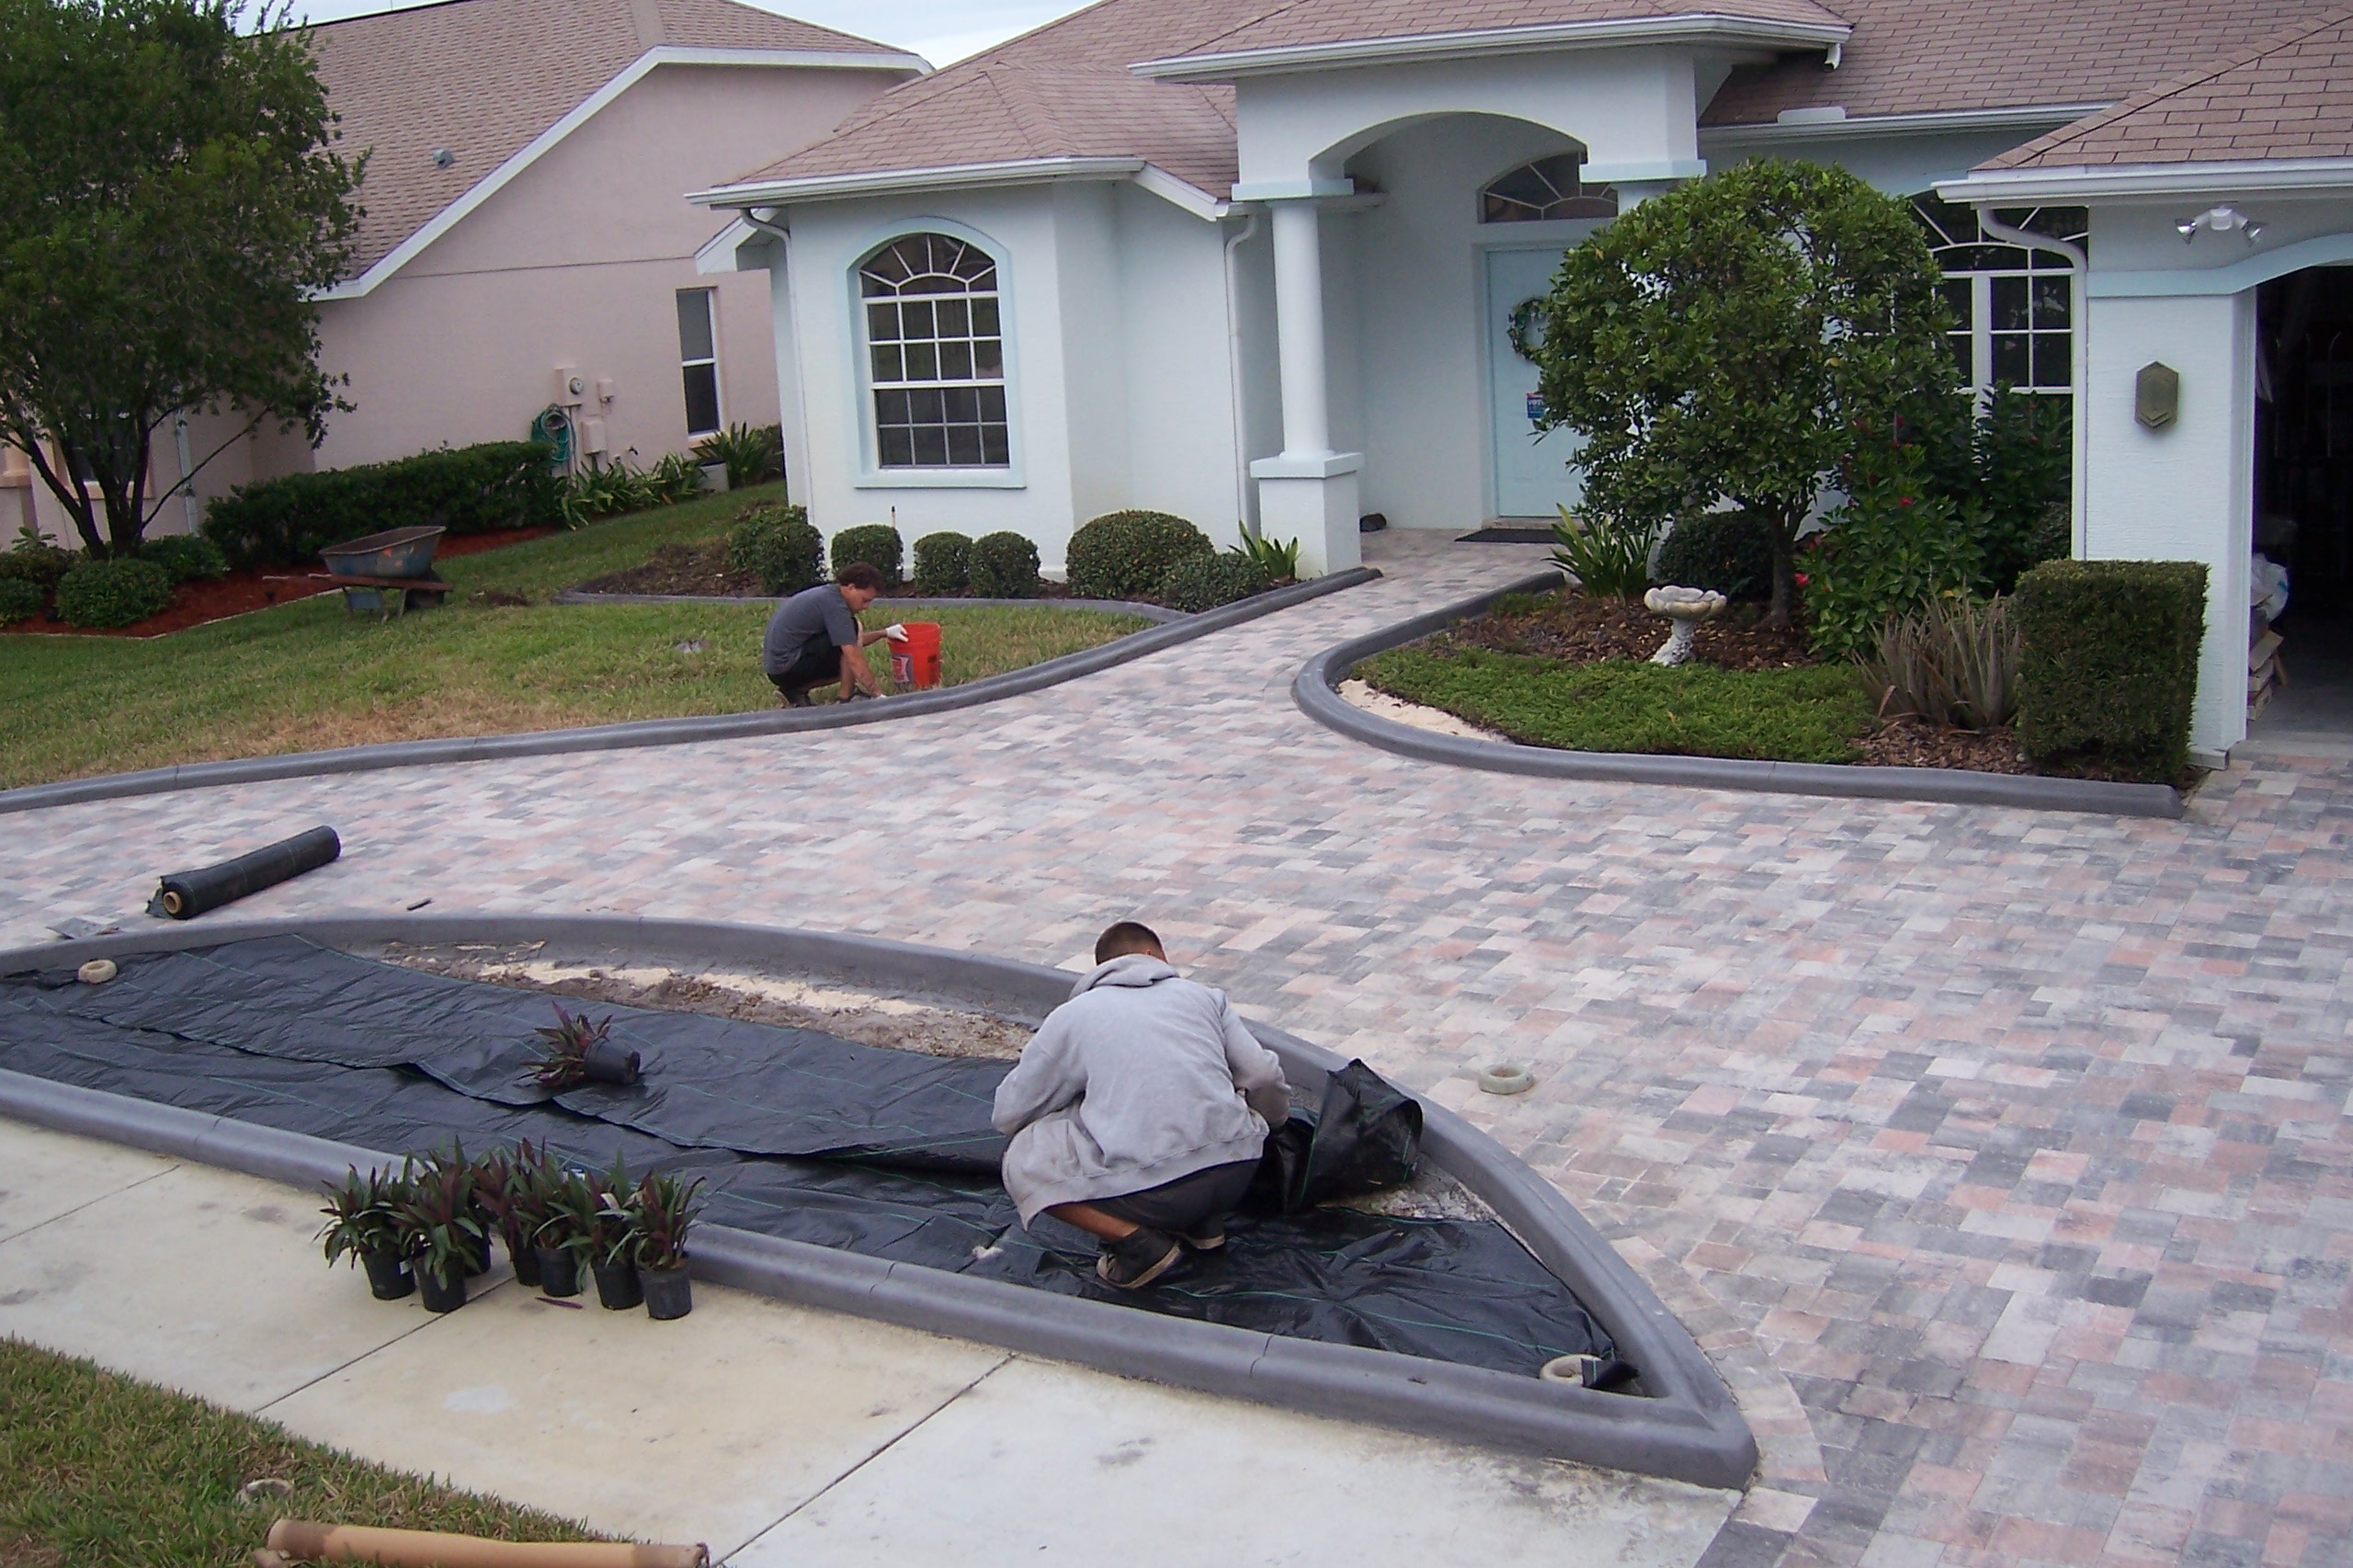 Professionals from Curb Appeal Curbing hard at work